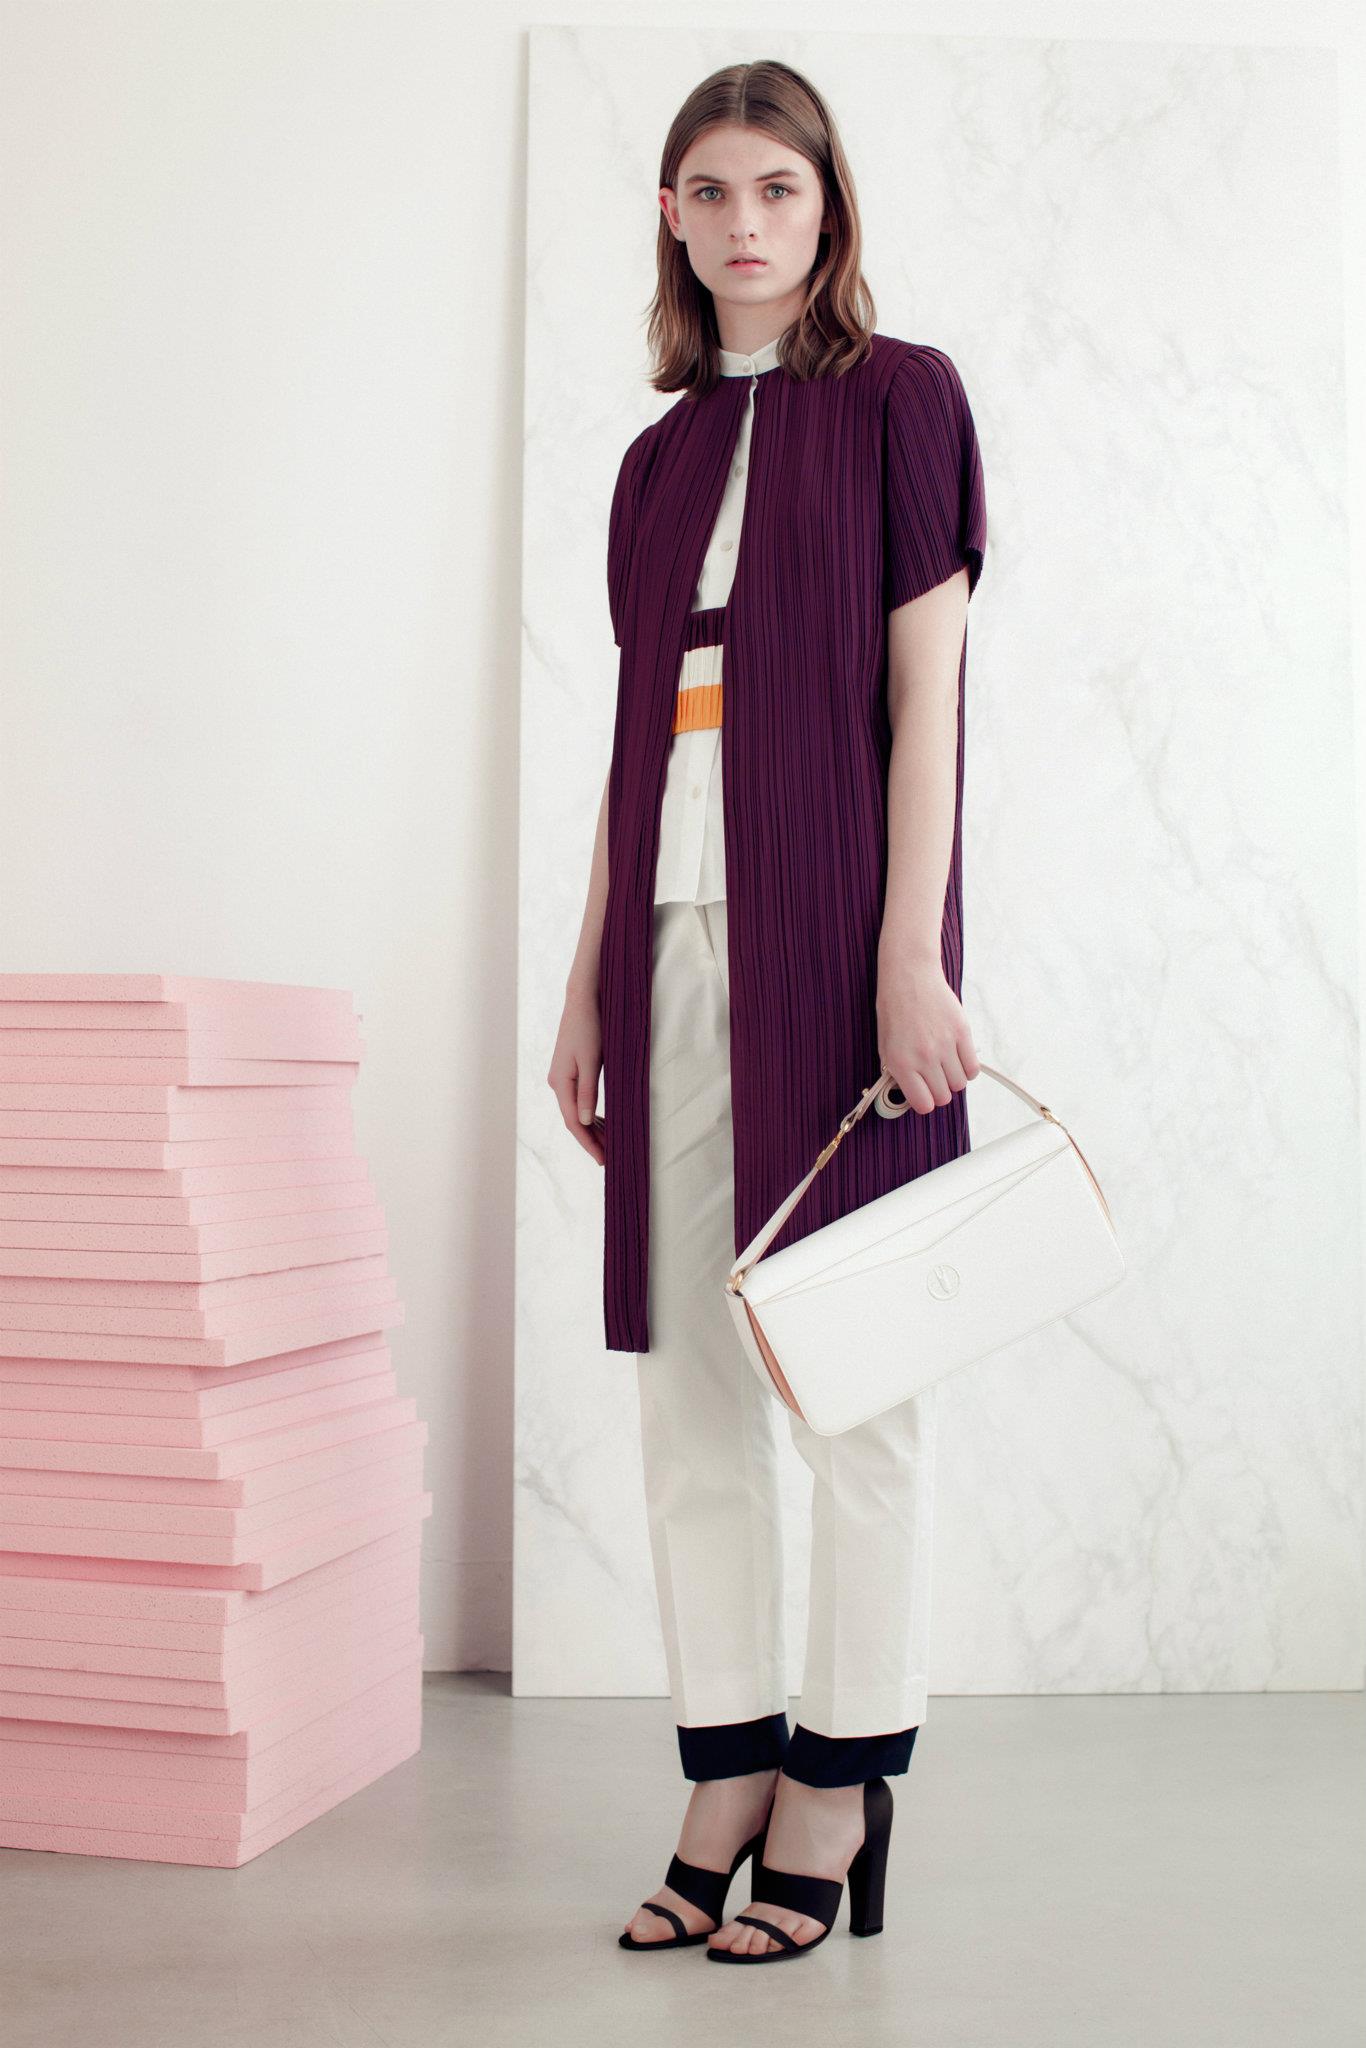 Vionnet Spring 2013 Collection 11